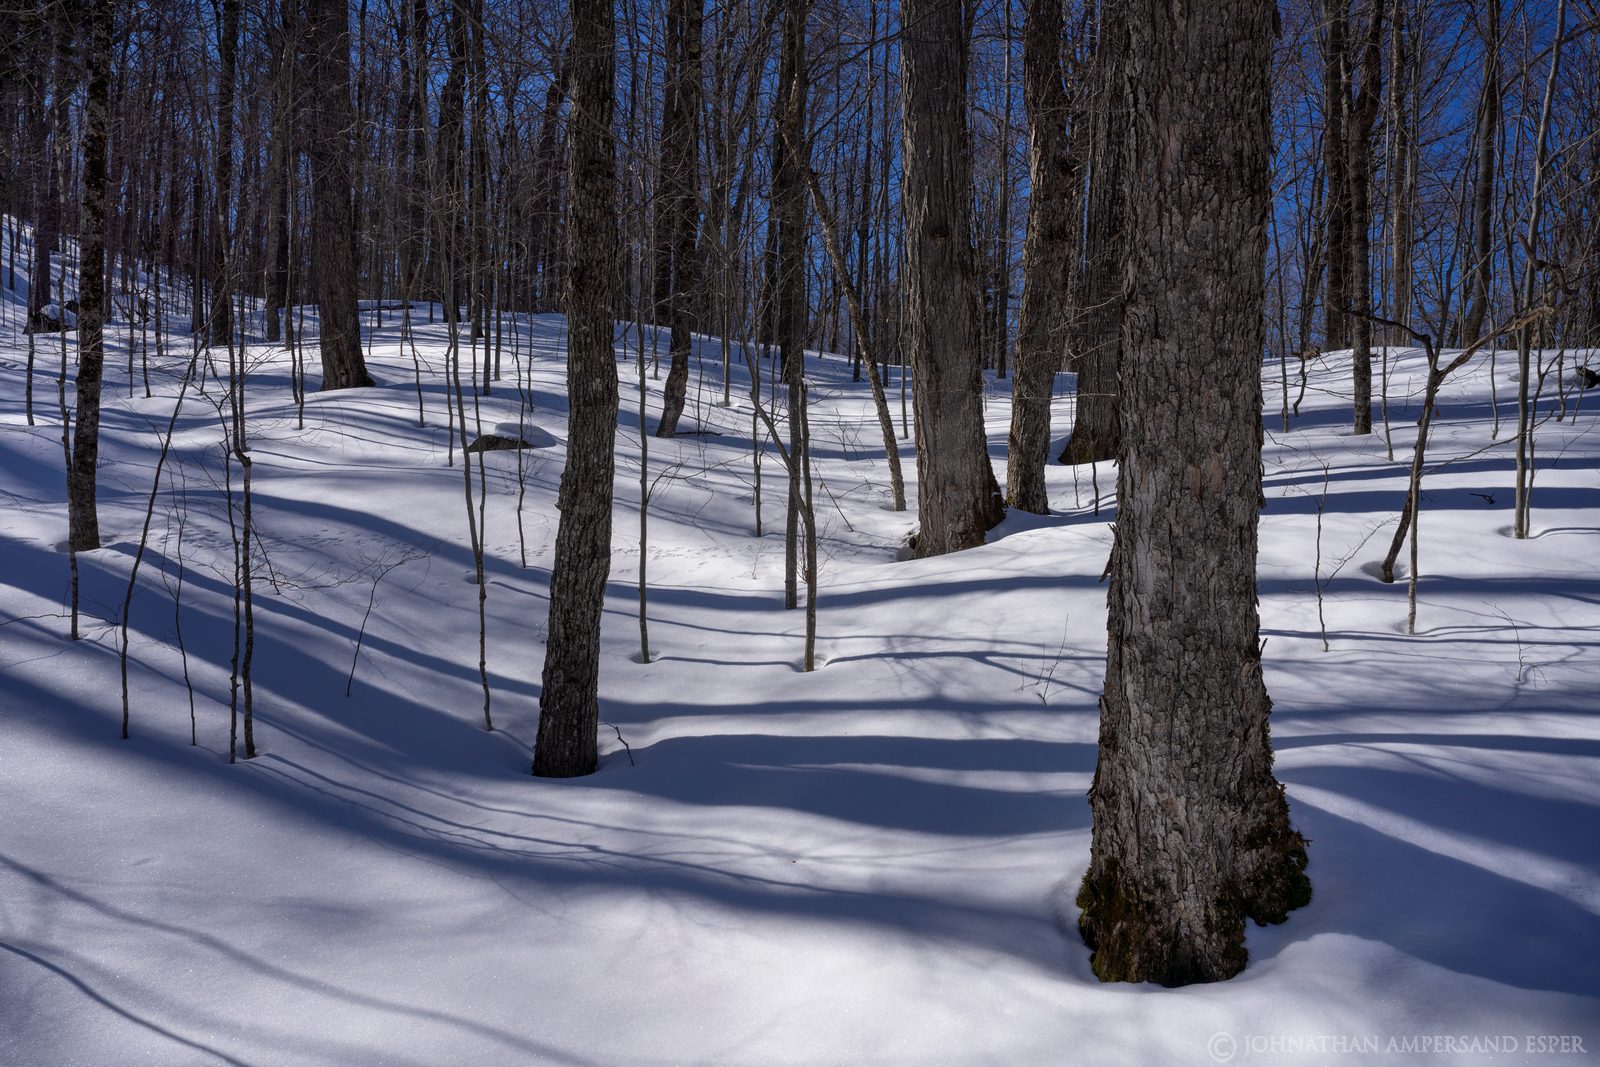 Marcy Dam trail,hardwood forest,late winter,forest,winter,trees,snow,